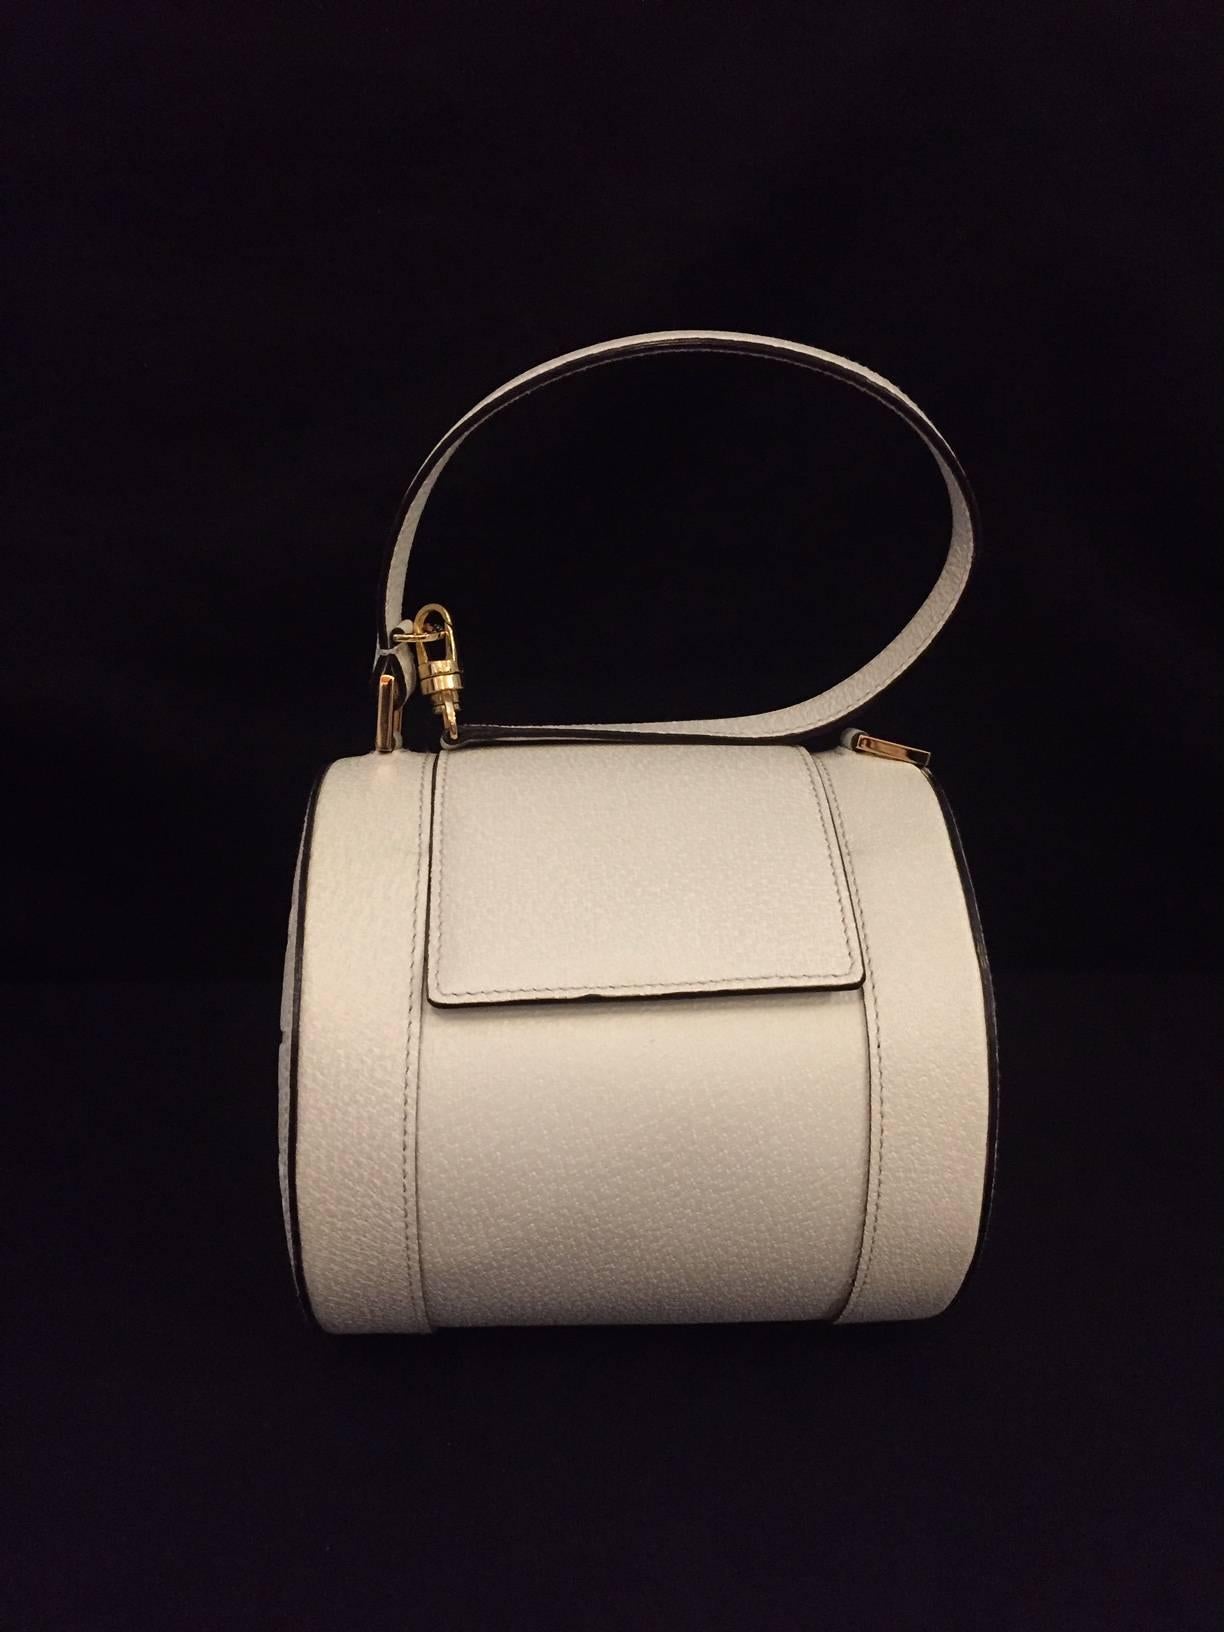 Bvlgari crafts much more than some of the world's most highly desired fine jewelry!  Ivory textured leather cylindrical bag features geometric shape, Gold tone hardware and flap.  Boasts iconic "BVLGARI" logo on both sides.  Magnetic Snap